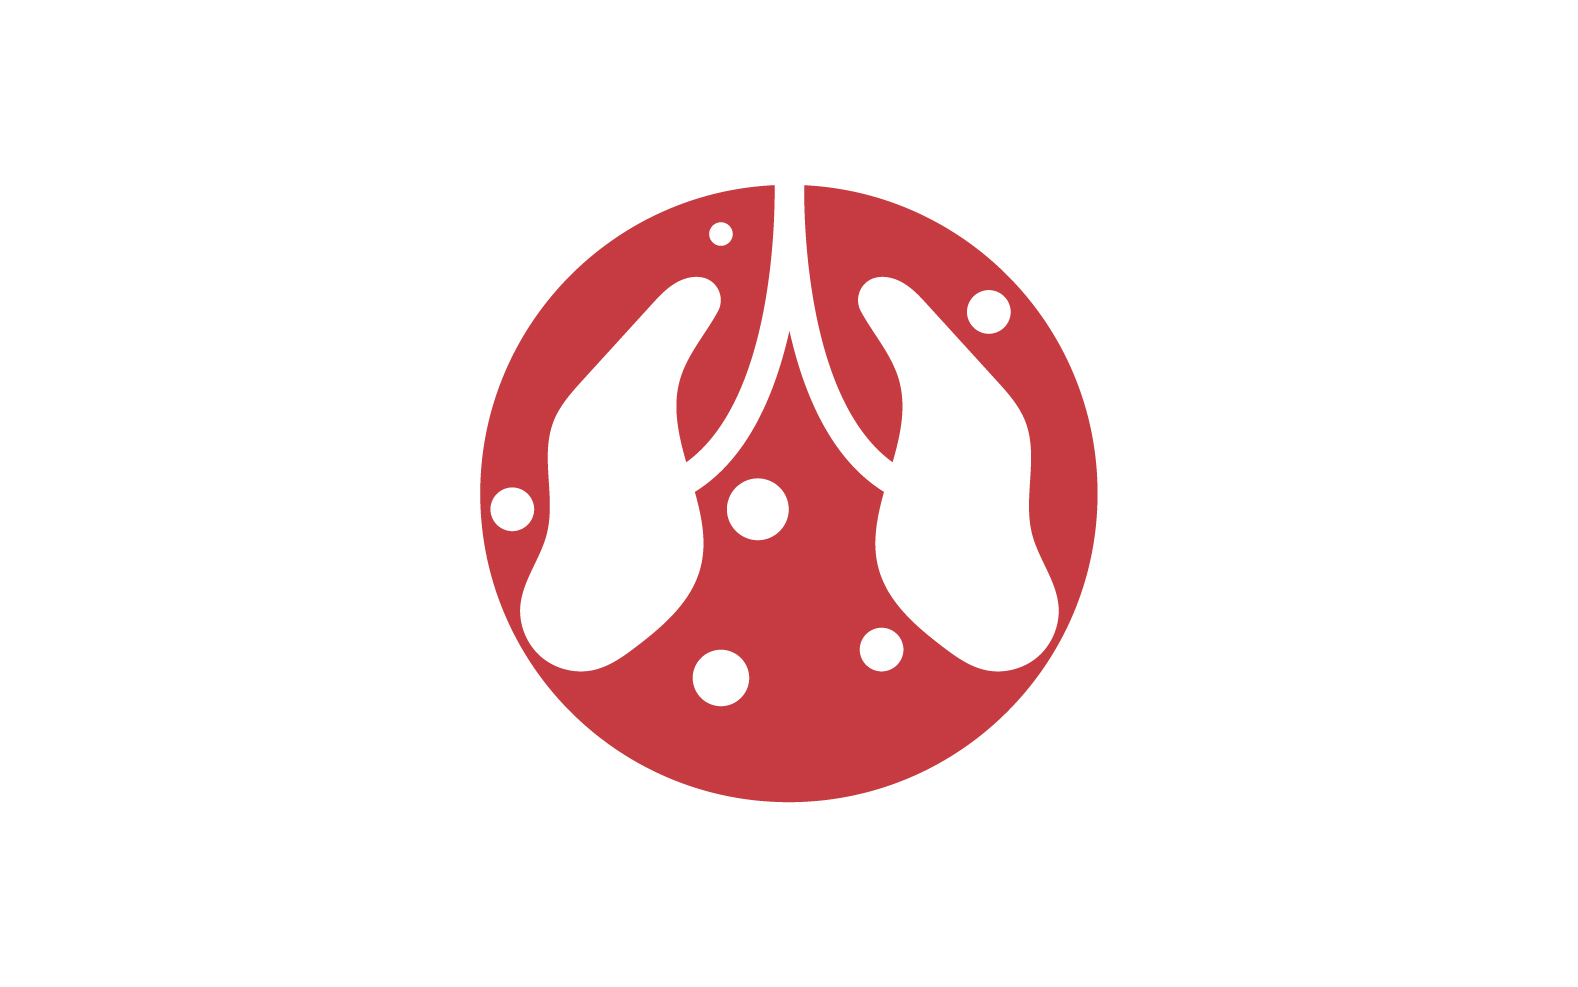 Health lungs logo and symbol vector v28